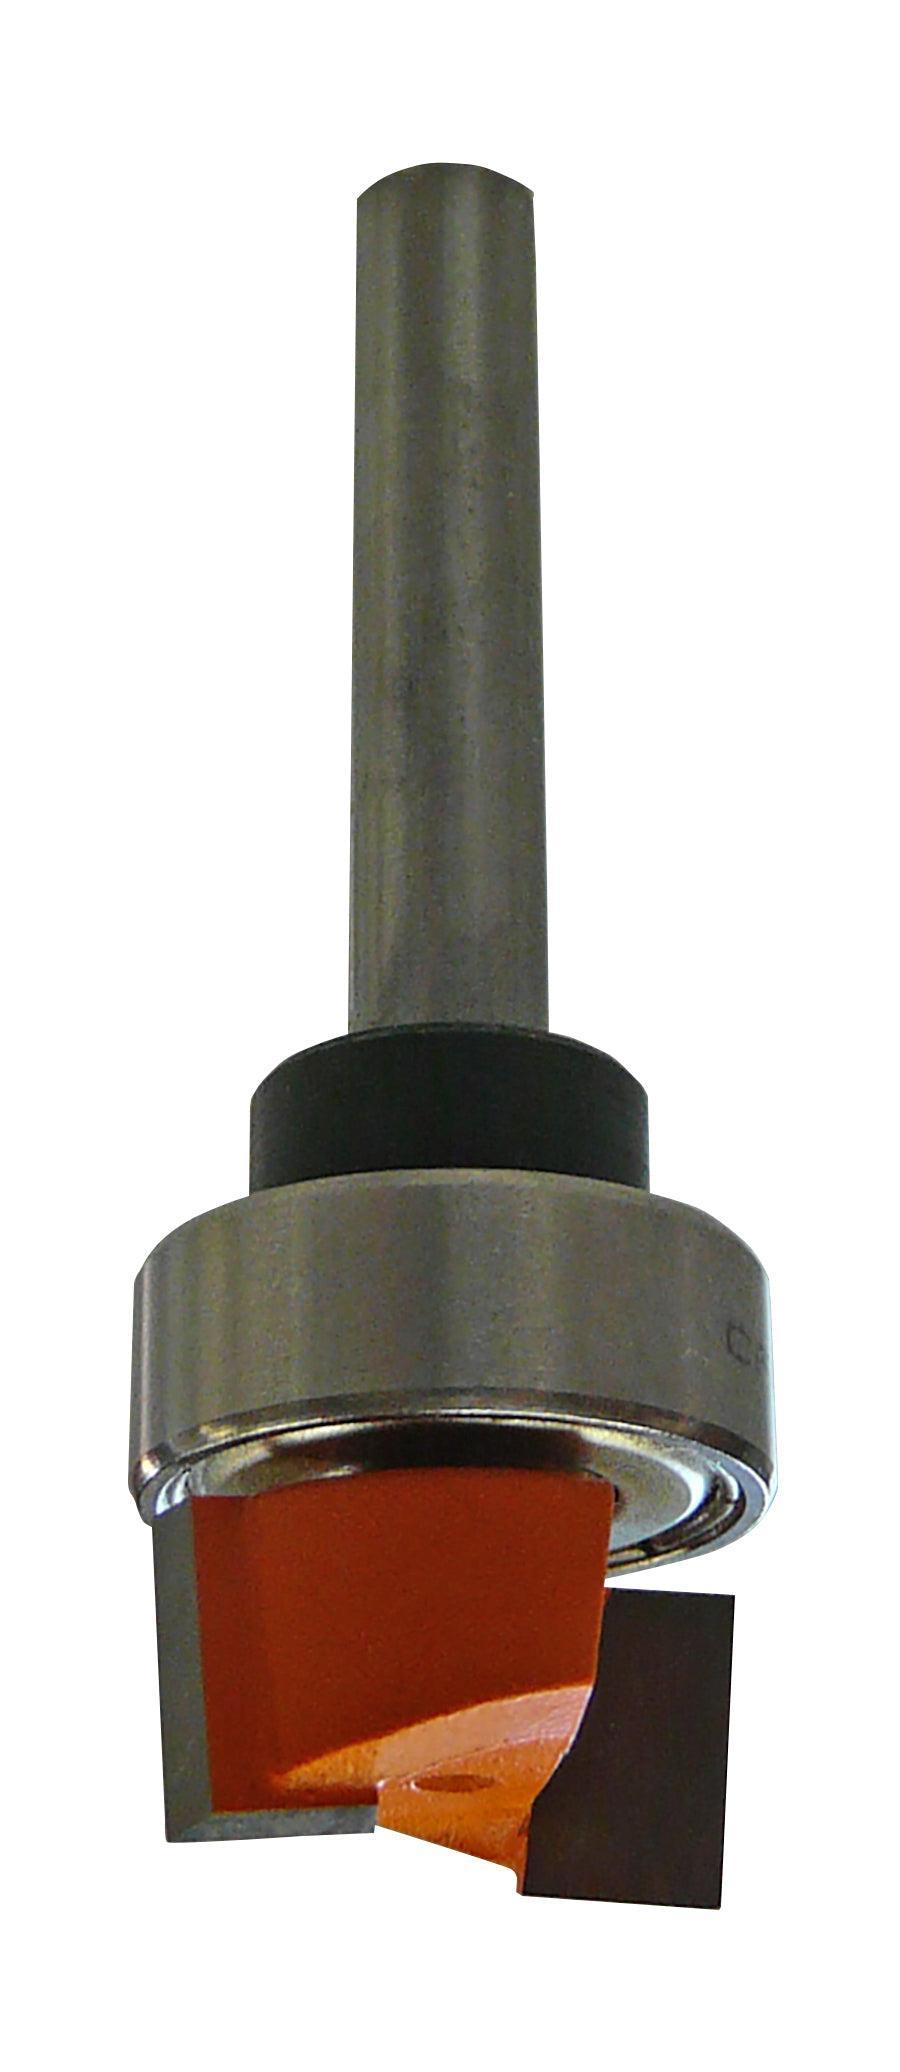 Replacement Router Bit for VB23IK - bisoninc